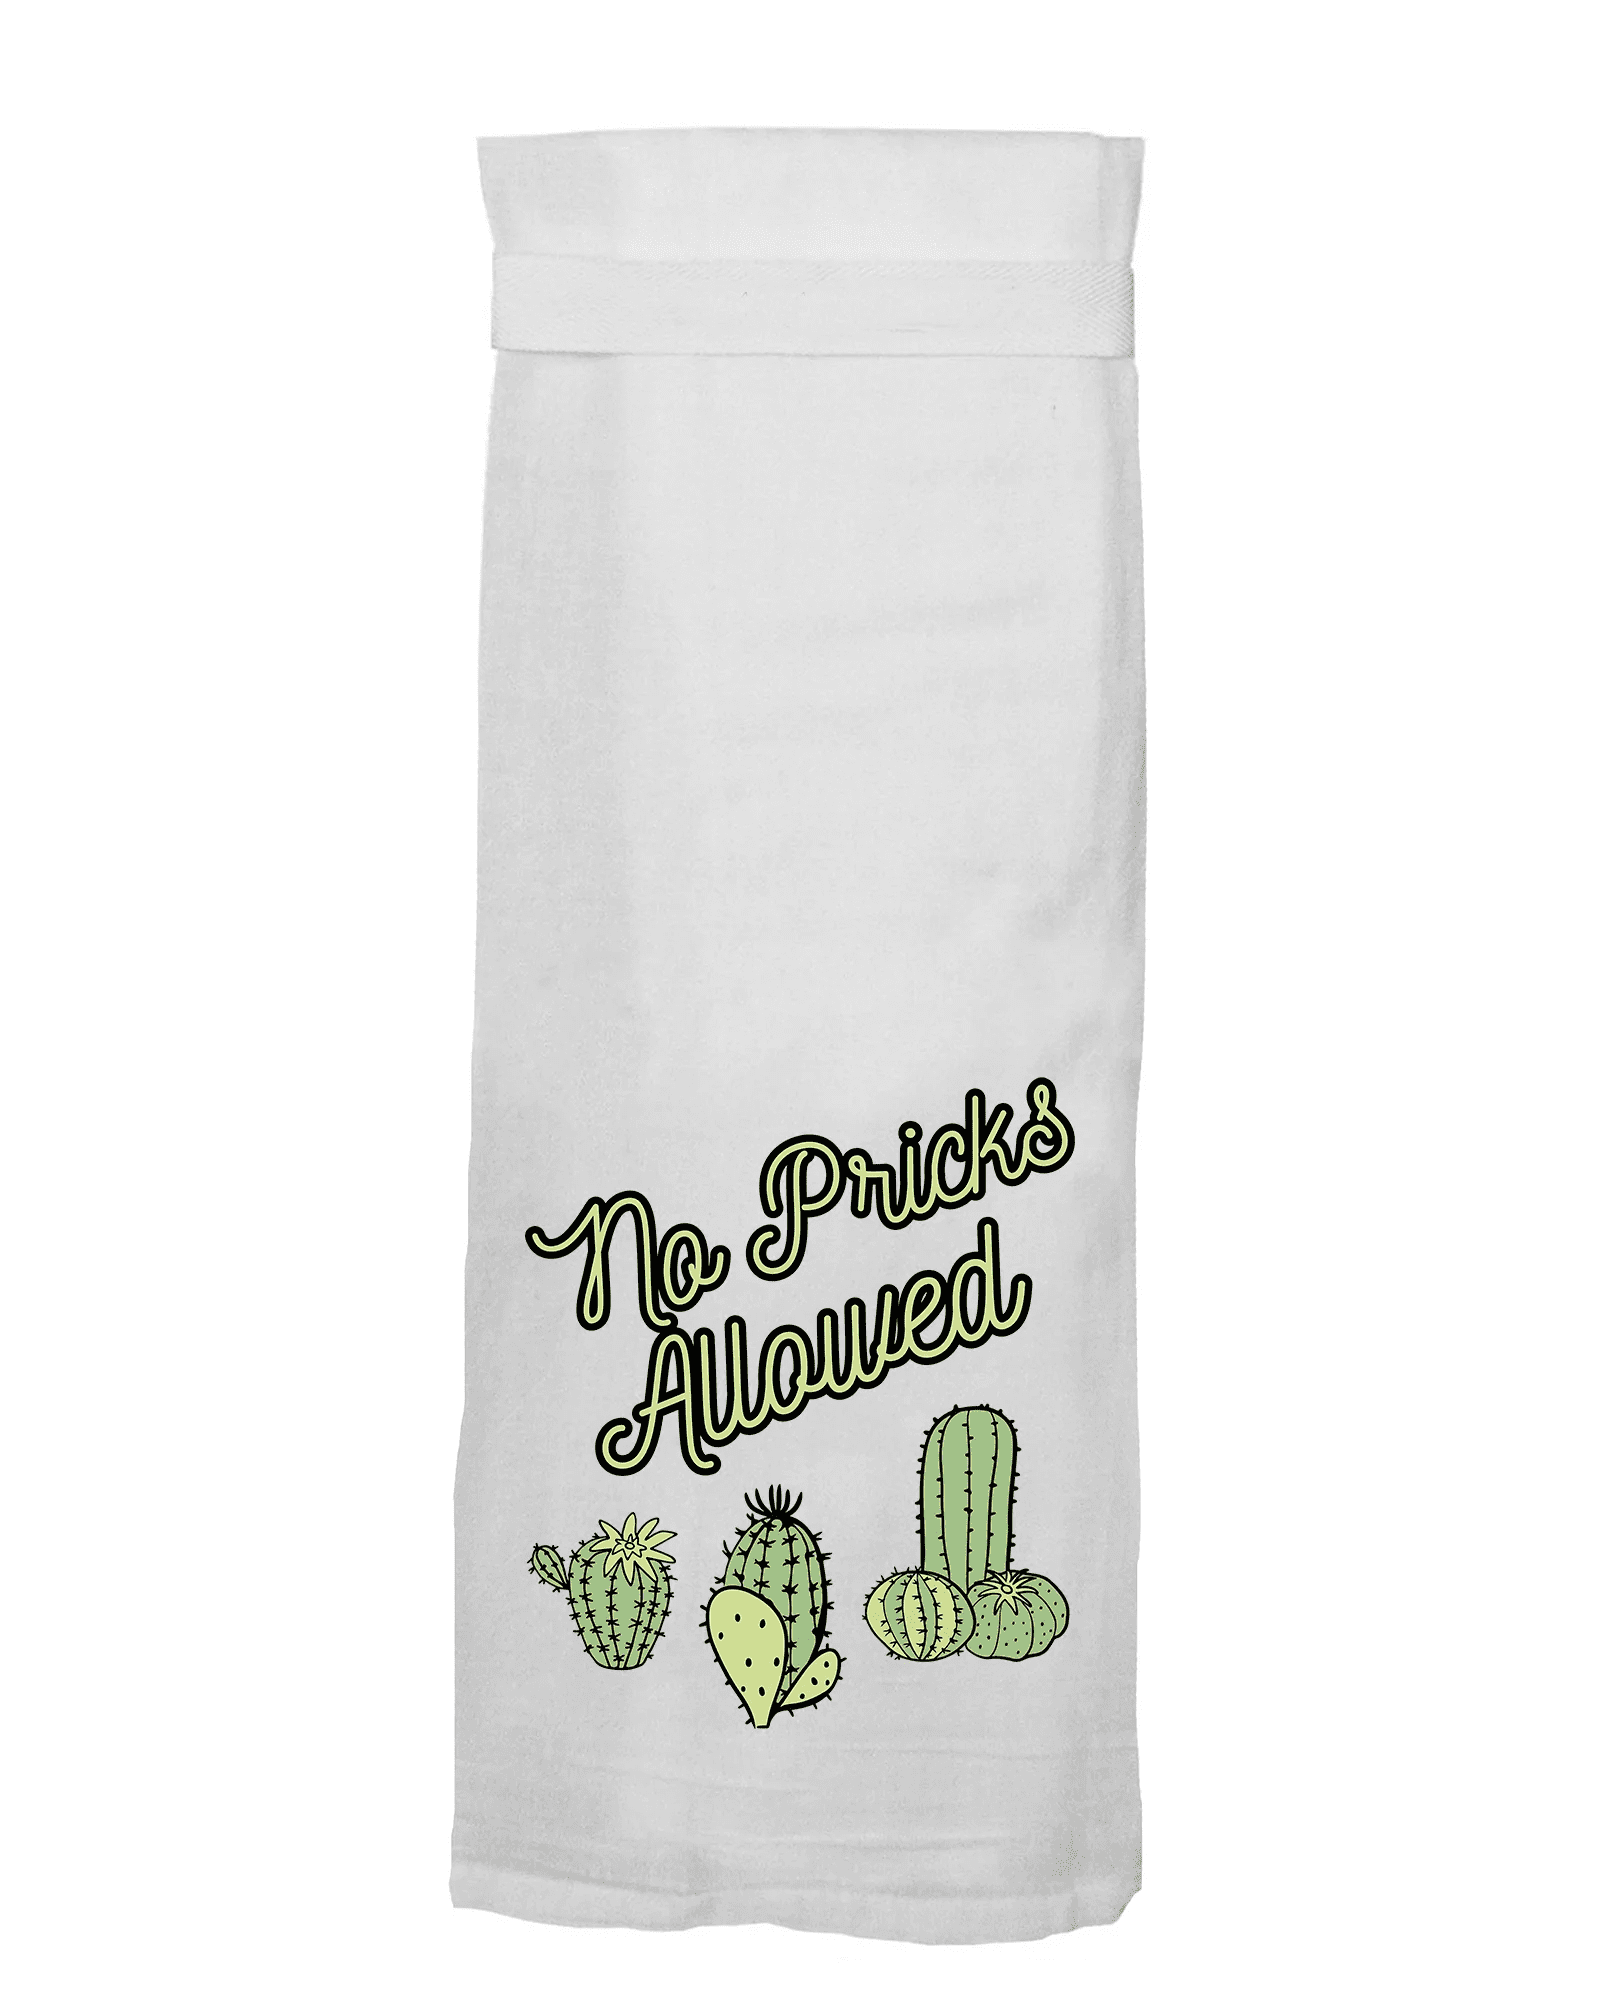 Funny Wholesale Kitchen Towels, Twisted Wares, Does This Towel Smell Like  Chloroform